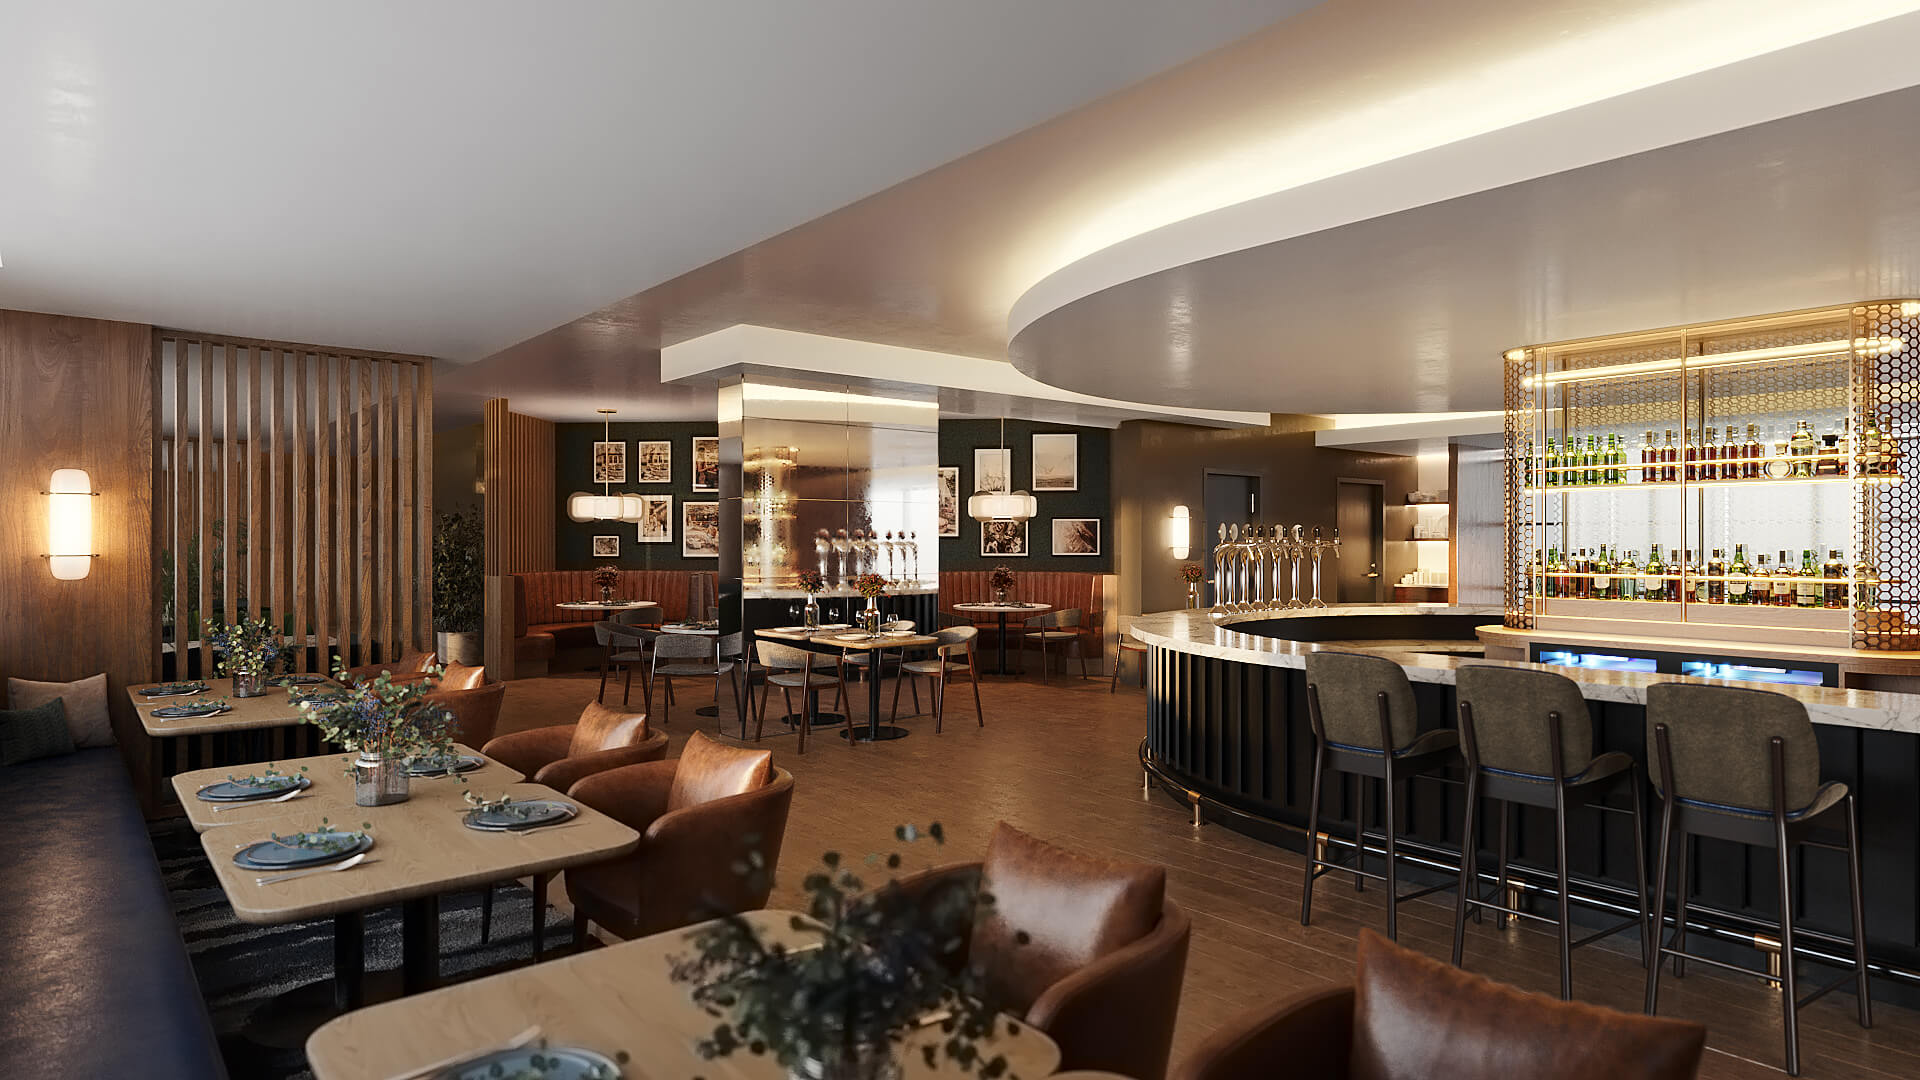 3D Visualization of a London Restaurant for GDC Group